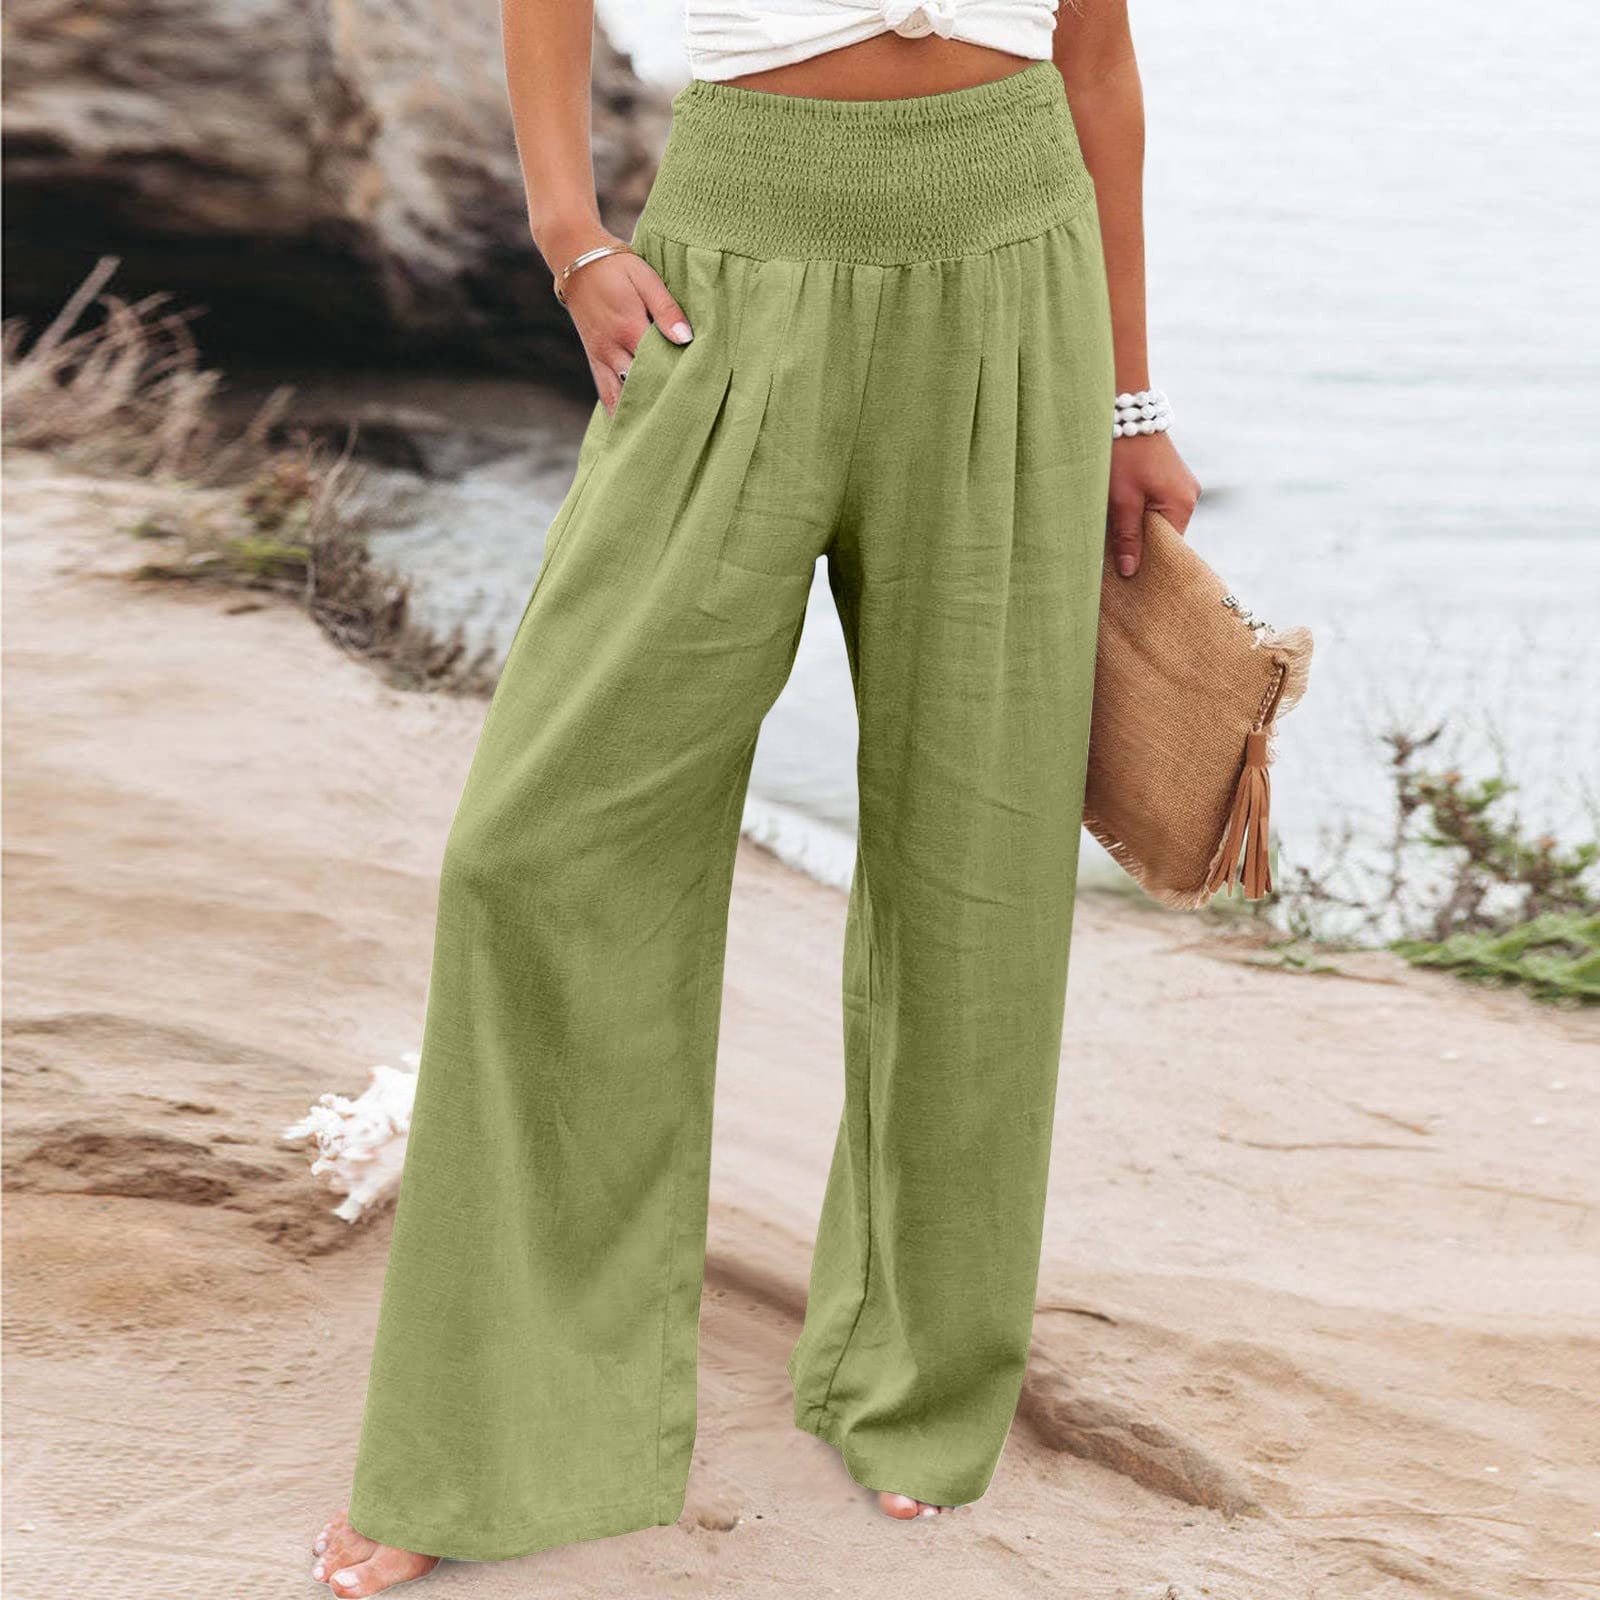 SHINE ON BLACK PALAZZO PANTS- in store - Allure Clothing Boutique